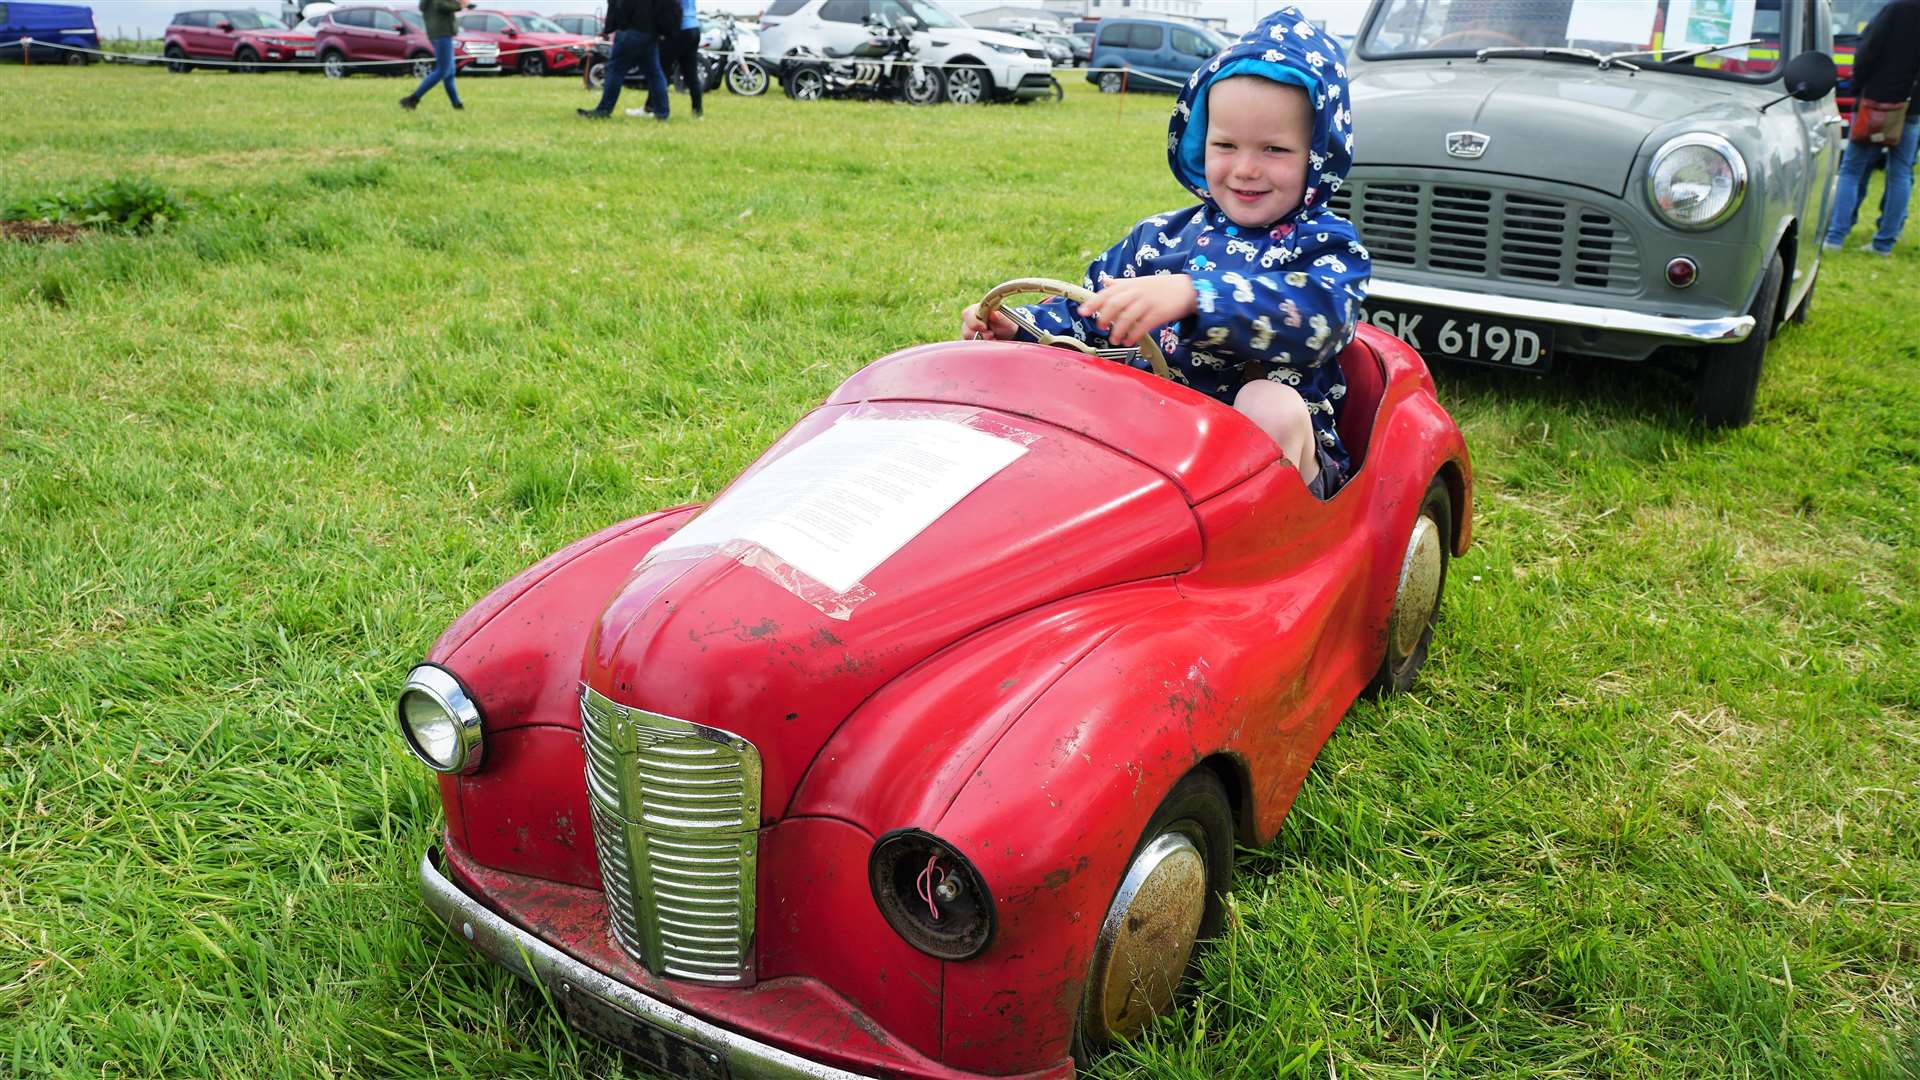 This Austin J40 Pedal Car dated 1965 proved popular with children. Picture: DGS